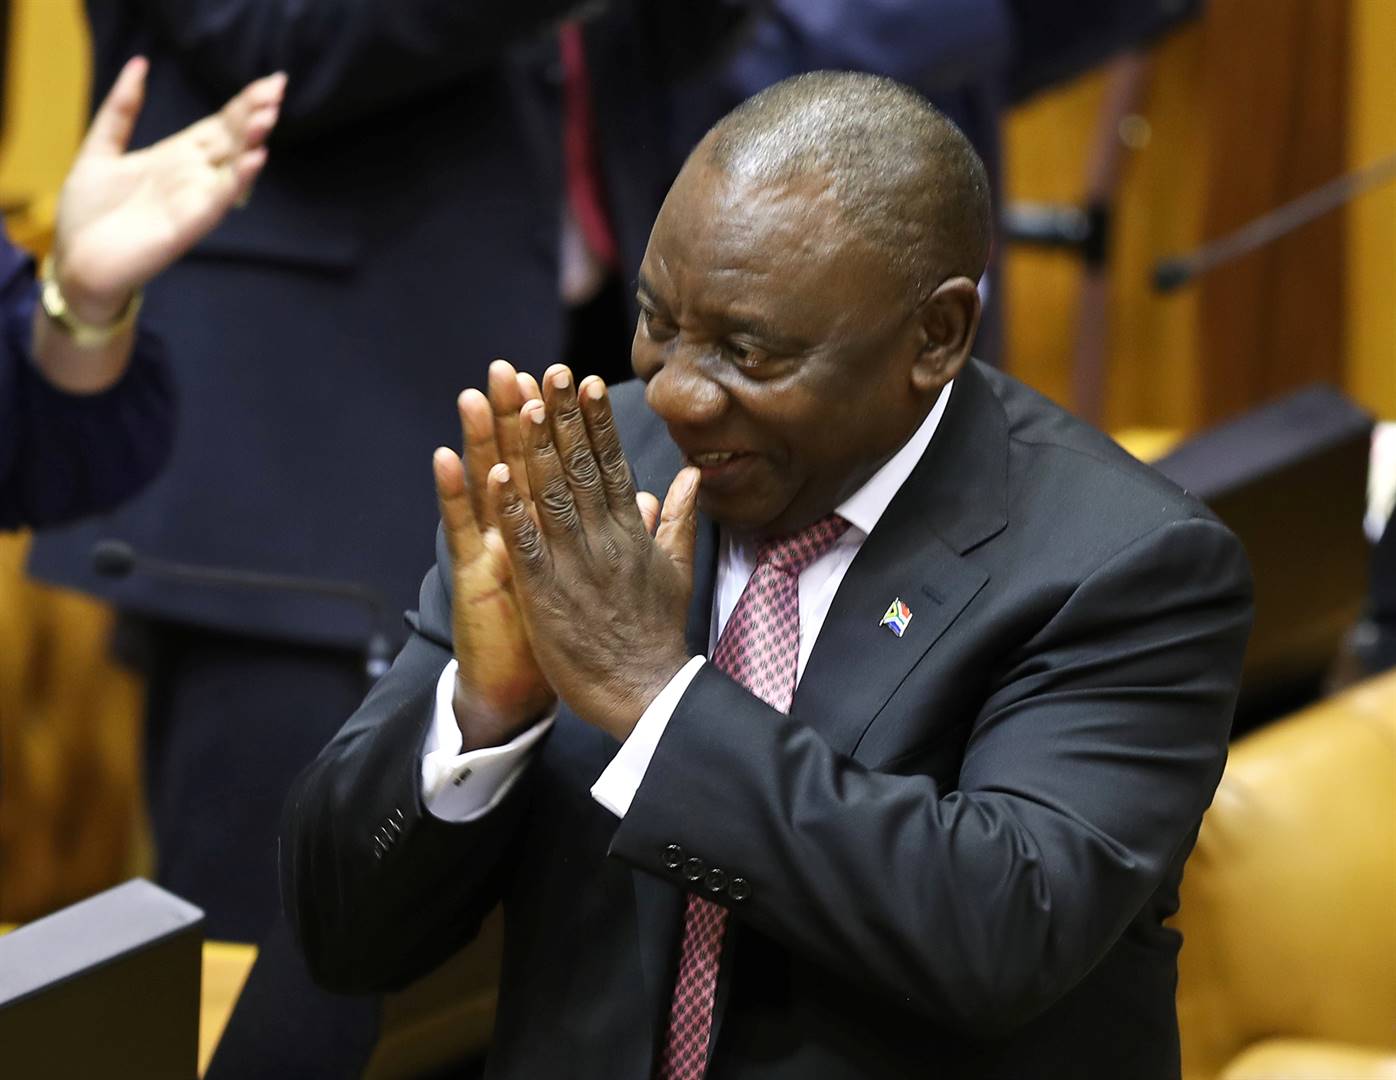 Cyril Ramaphosa acknowledges the applause after Parliament elected him as president on Wednesday (May 22 2019). Picture: Sumaya Hisham/Reuters